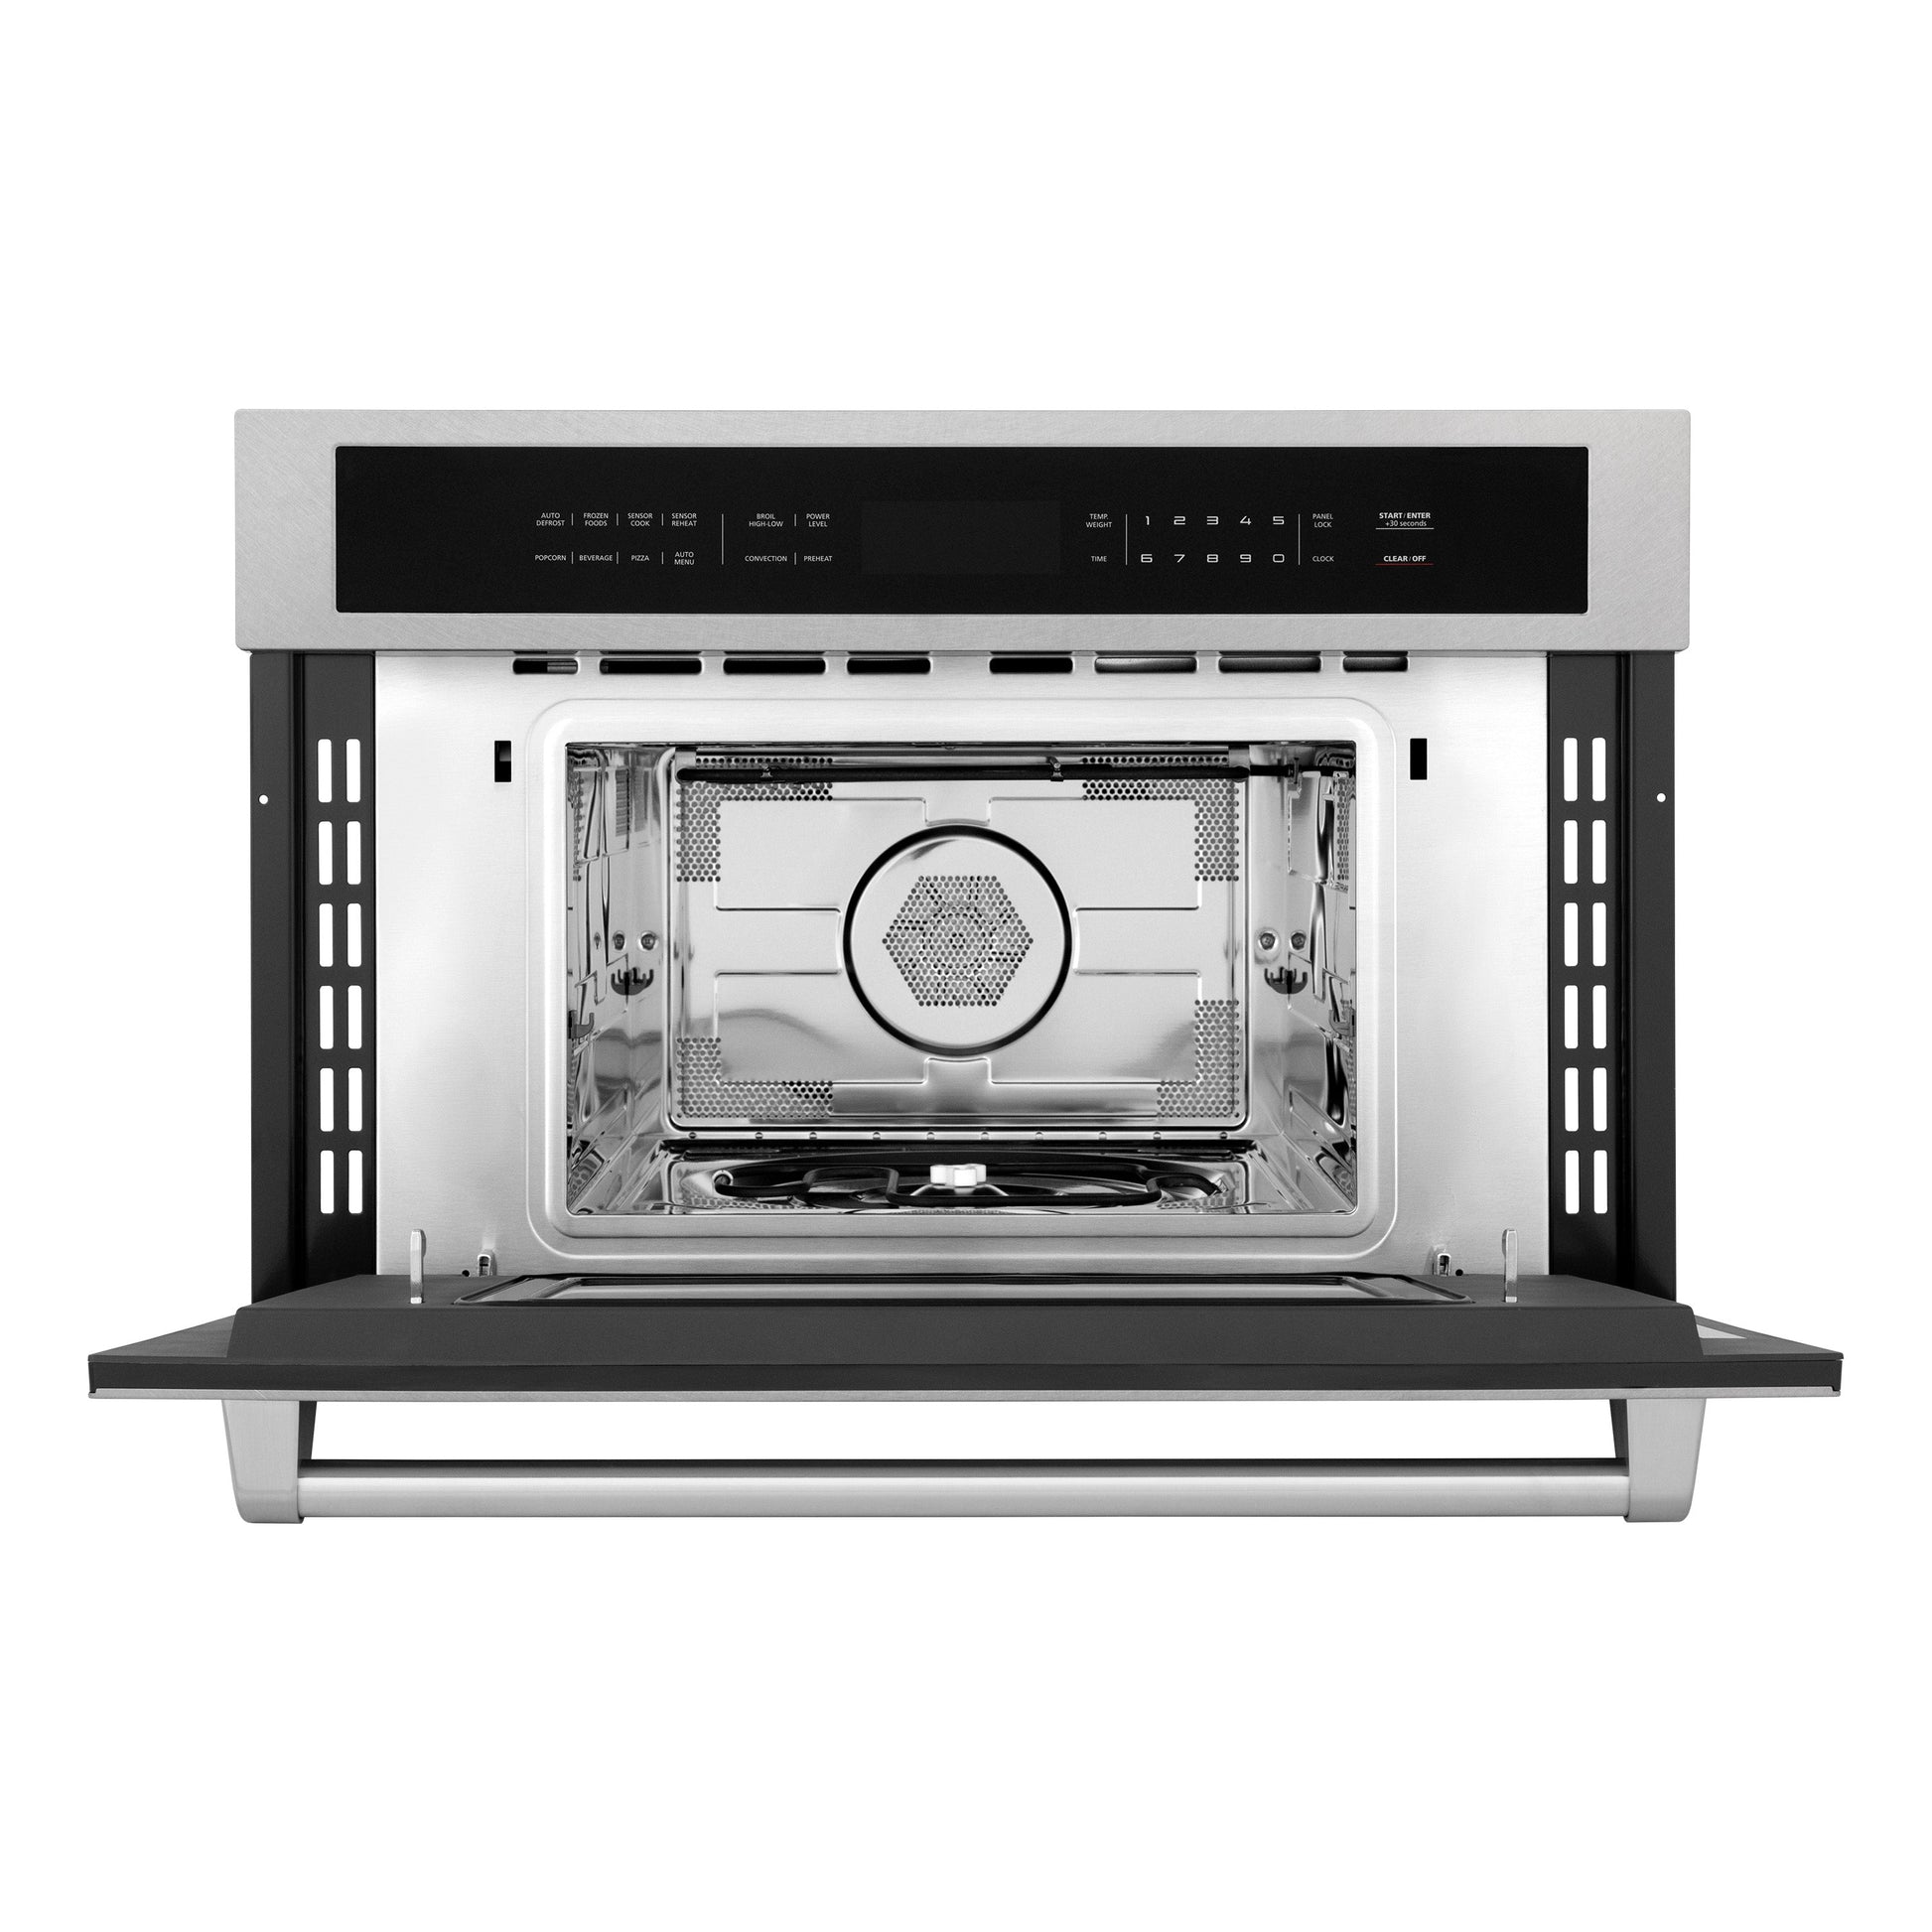 ZLINE 30" Built-in Convection Microwave Oven with Color Options - Stainless Steel